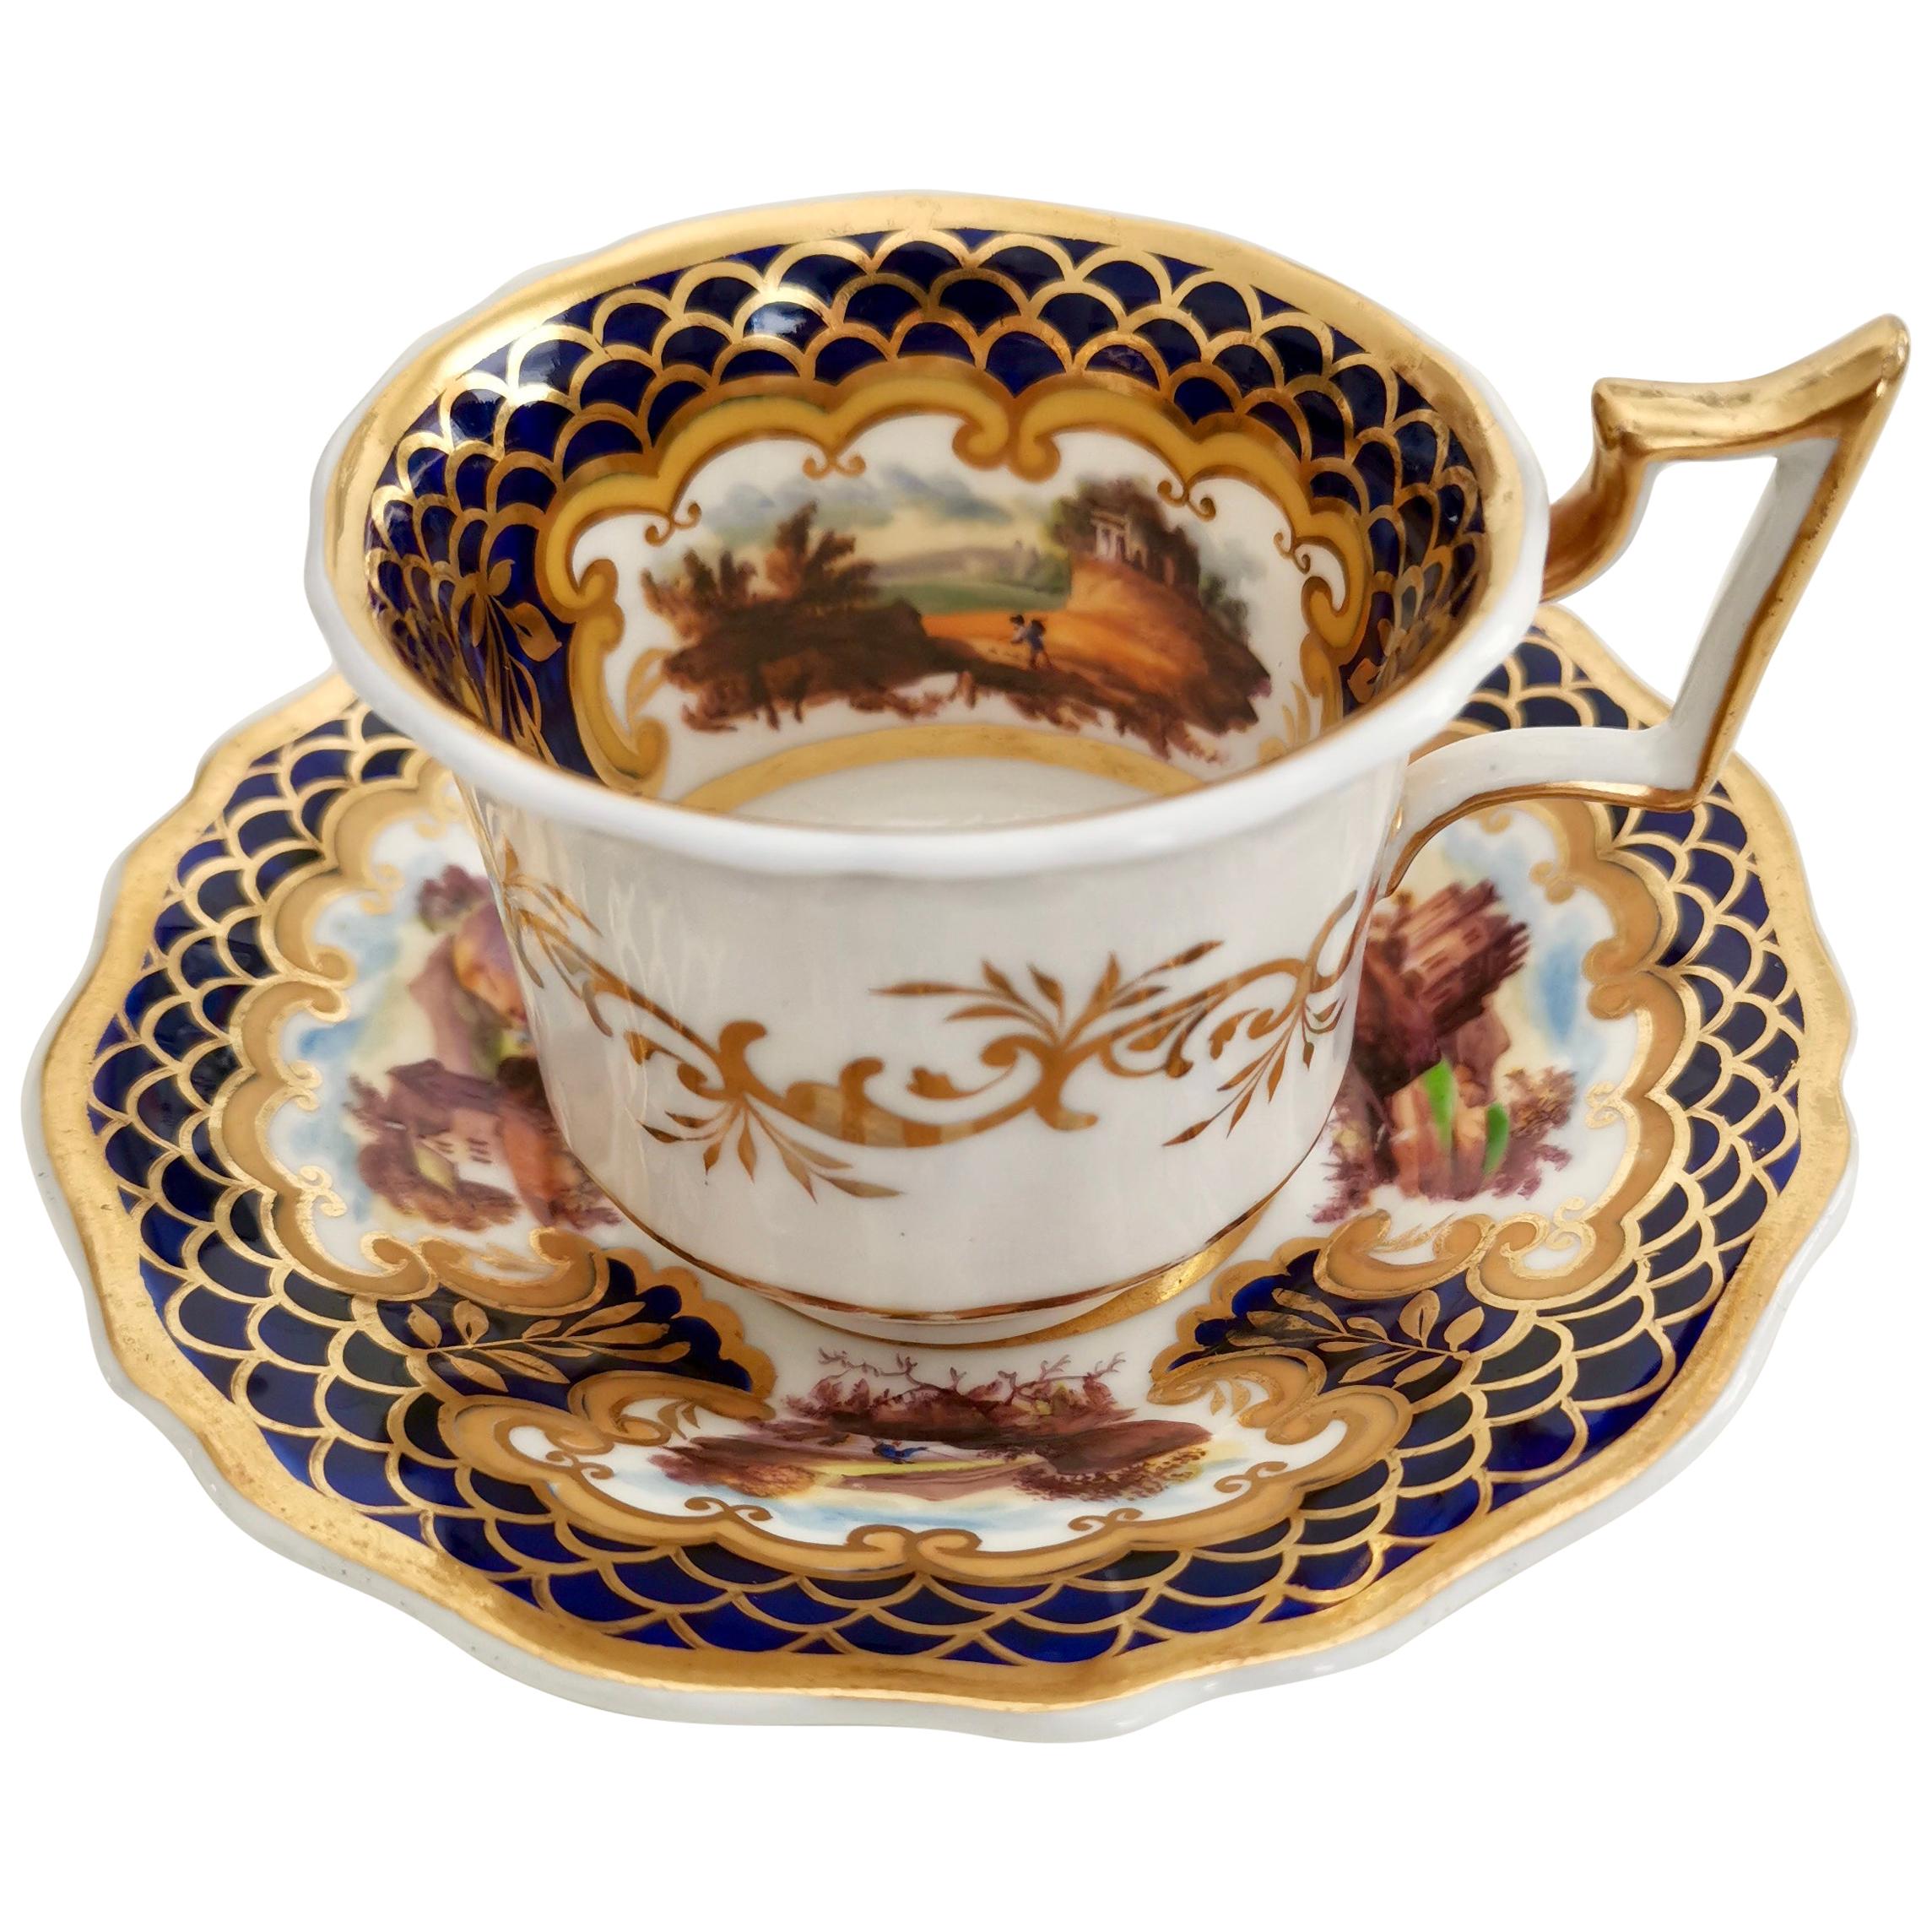 Rare Ridgway Coffee Cup, Cobalt Blue, Gilt and Sublime Landscapes, circa 1825